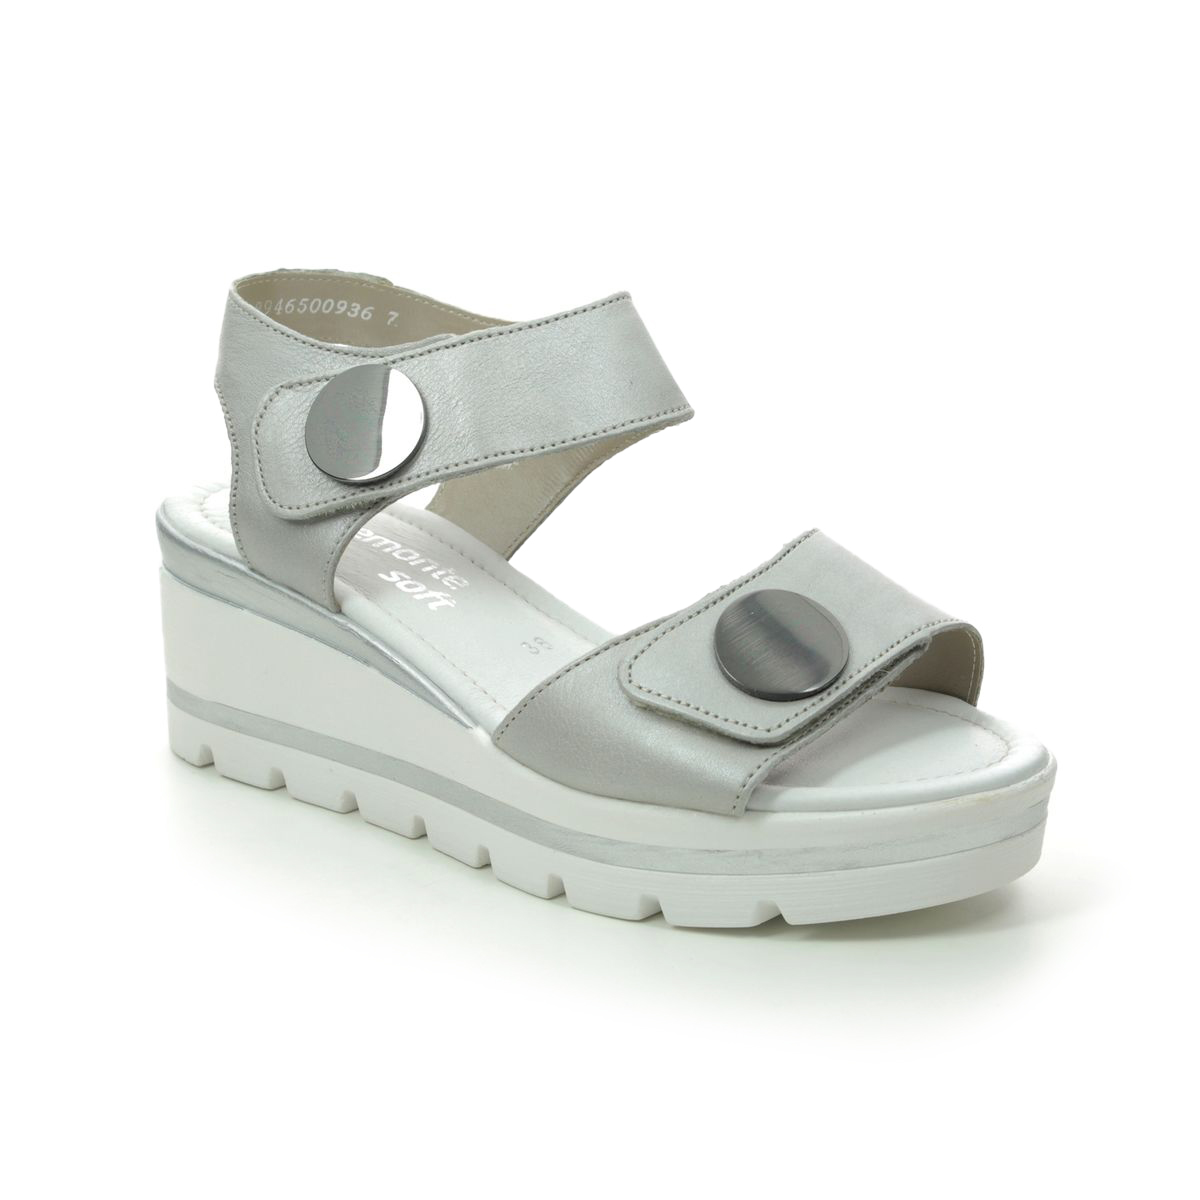 D1565-90 Light Grey Leather Wedge Sandals